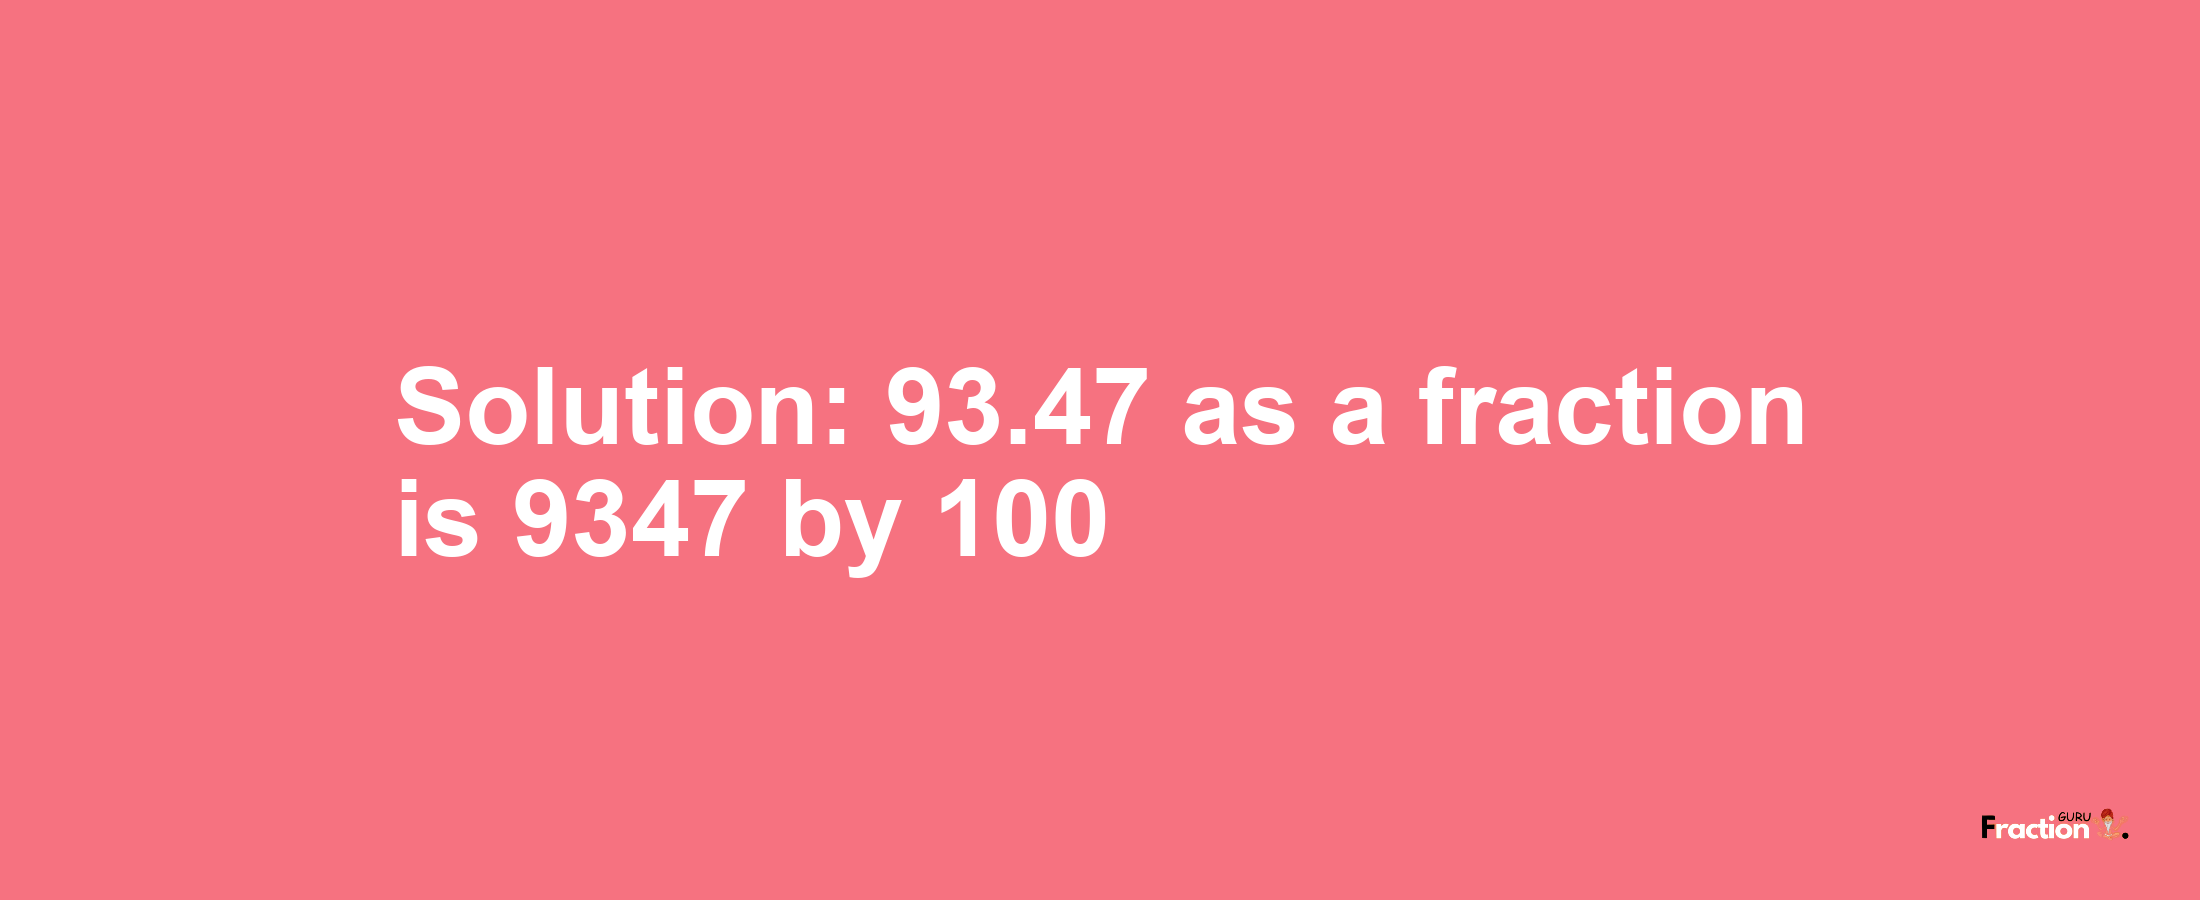 Solution:93.47 as a fraction is 9347/100